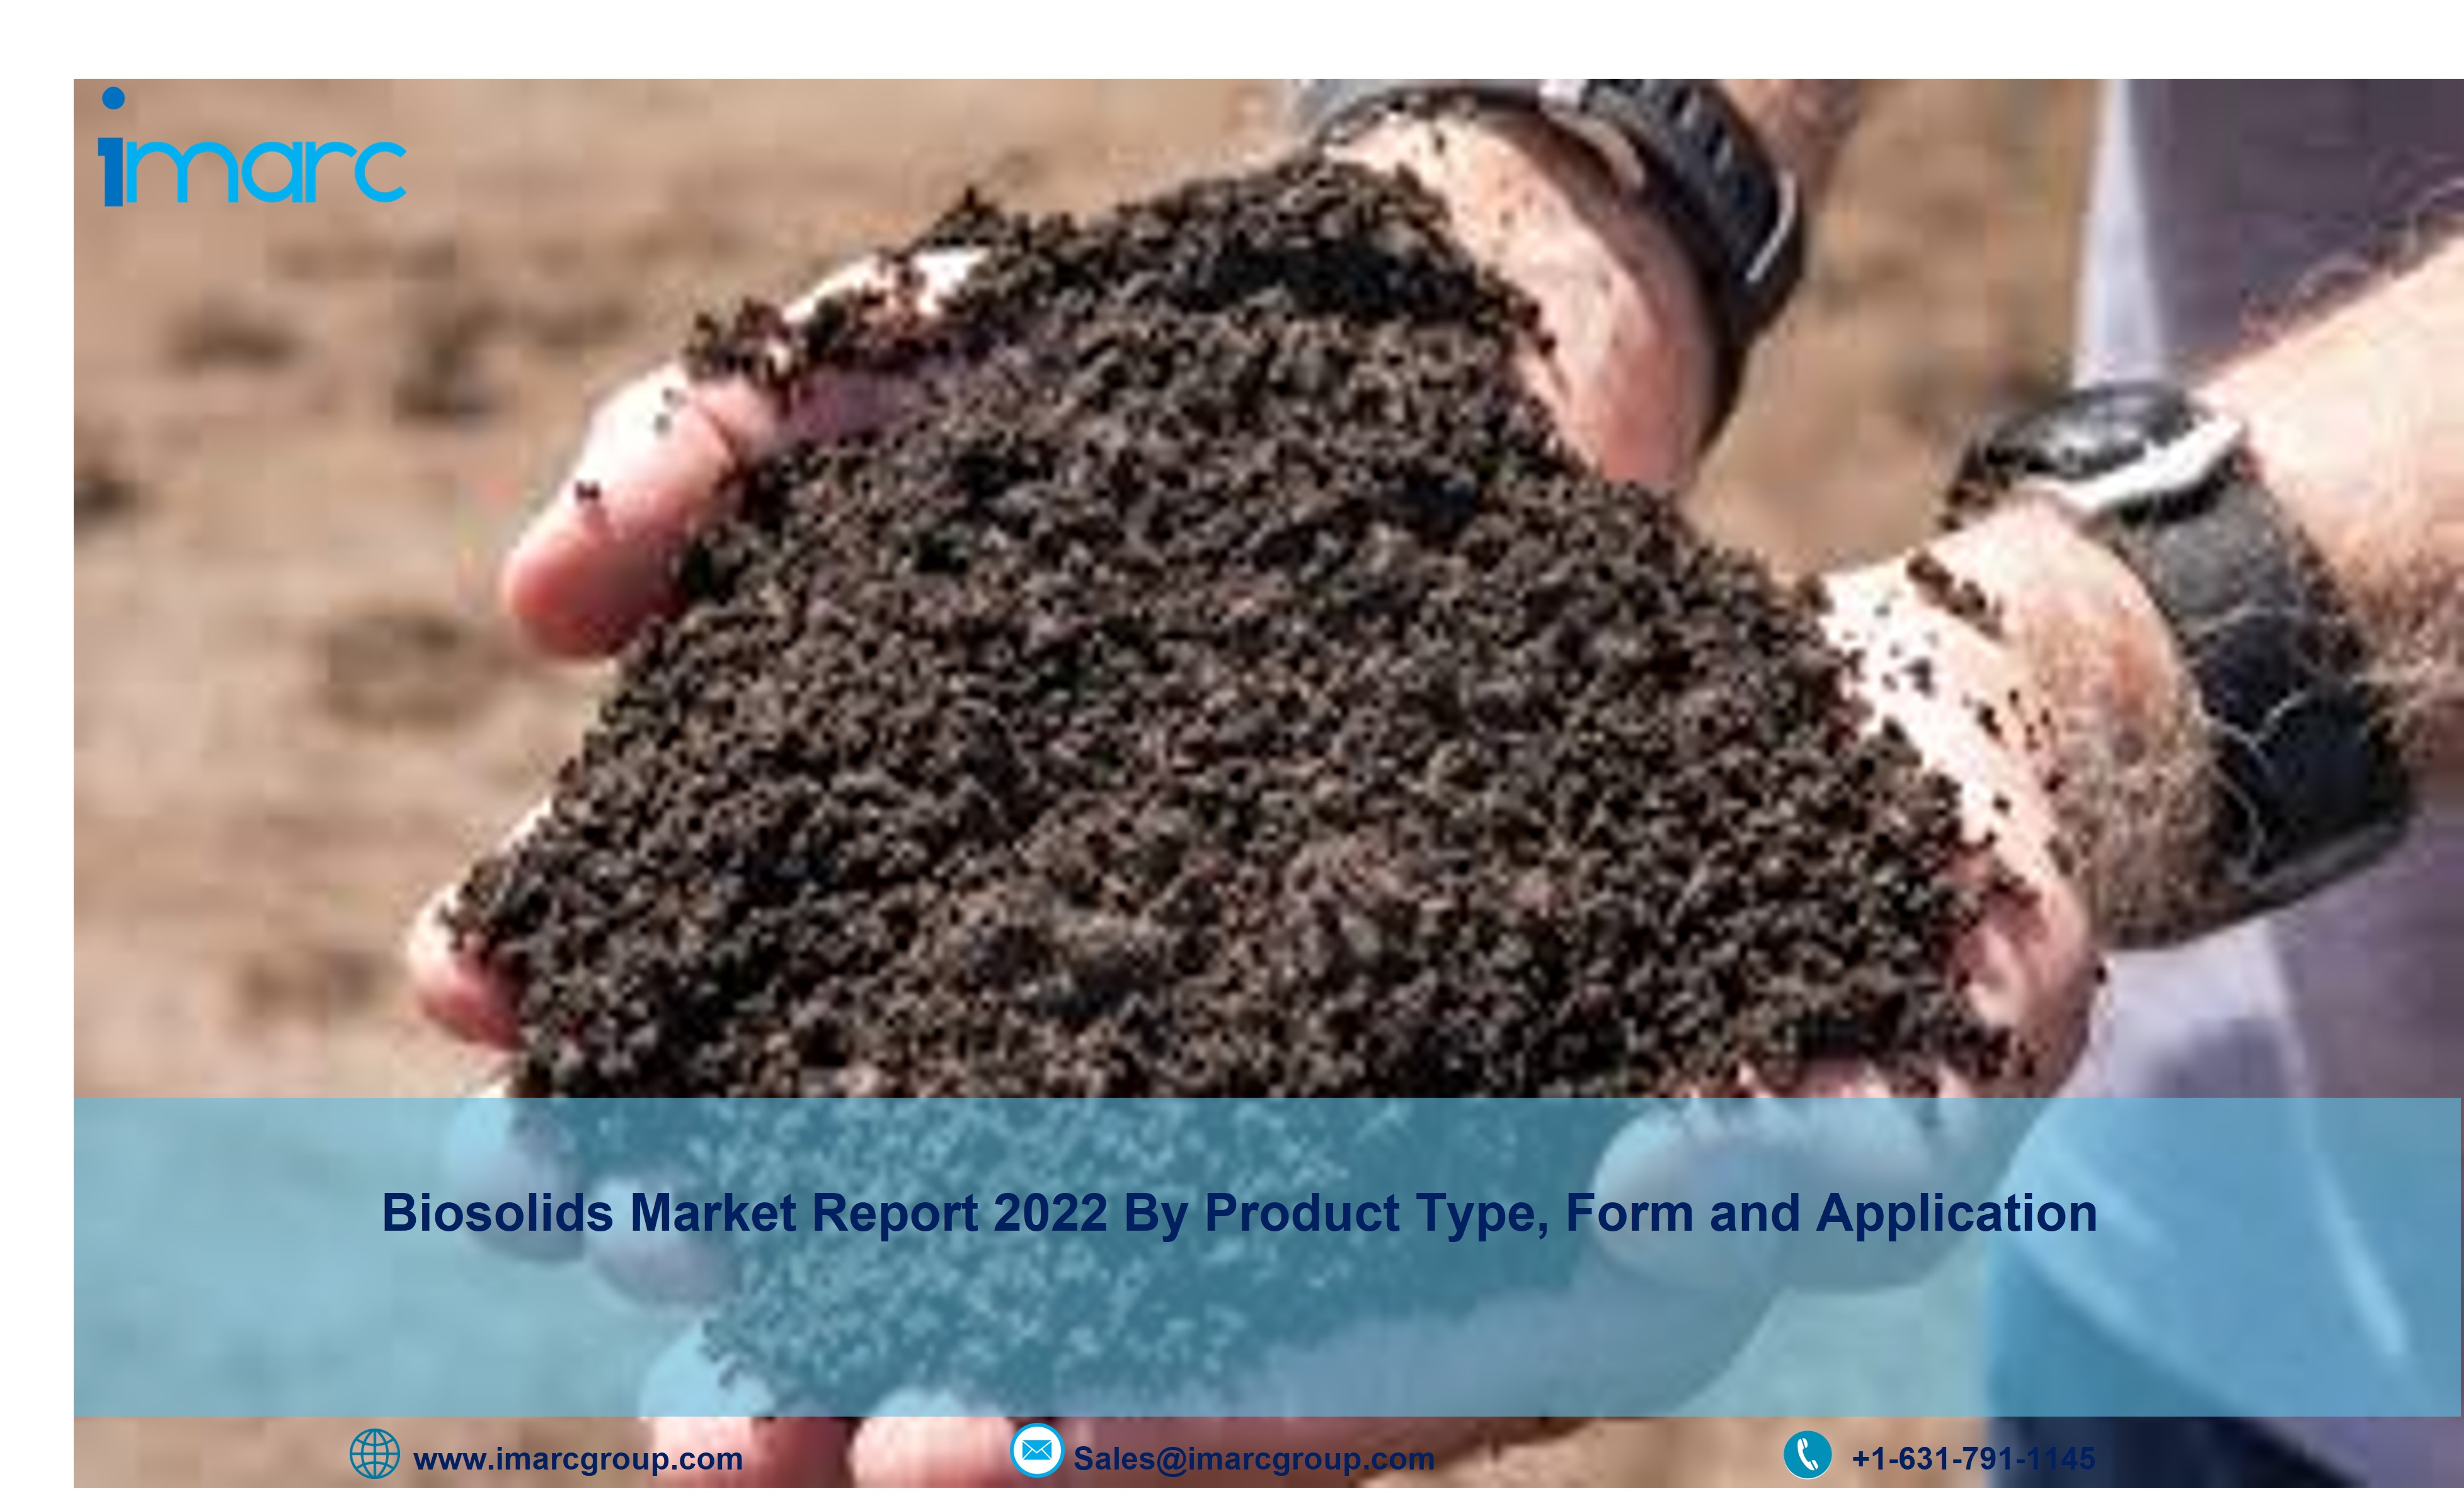 Biosolids Market Size to Reach US$ 2.06 Billion During 2022-2027 | Industry Forecast, Share and Growth